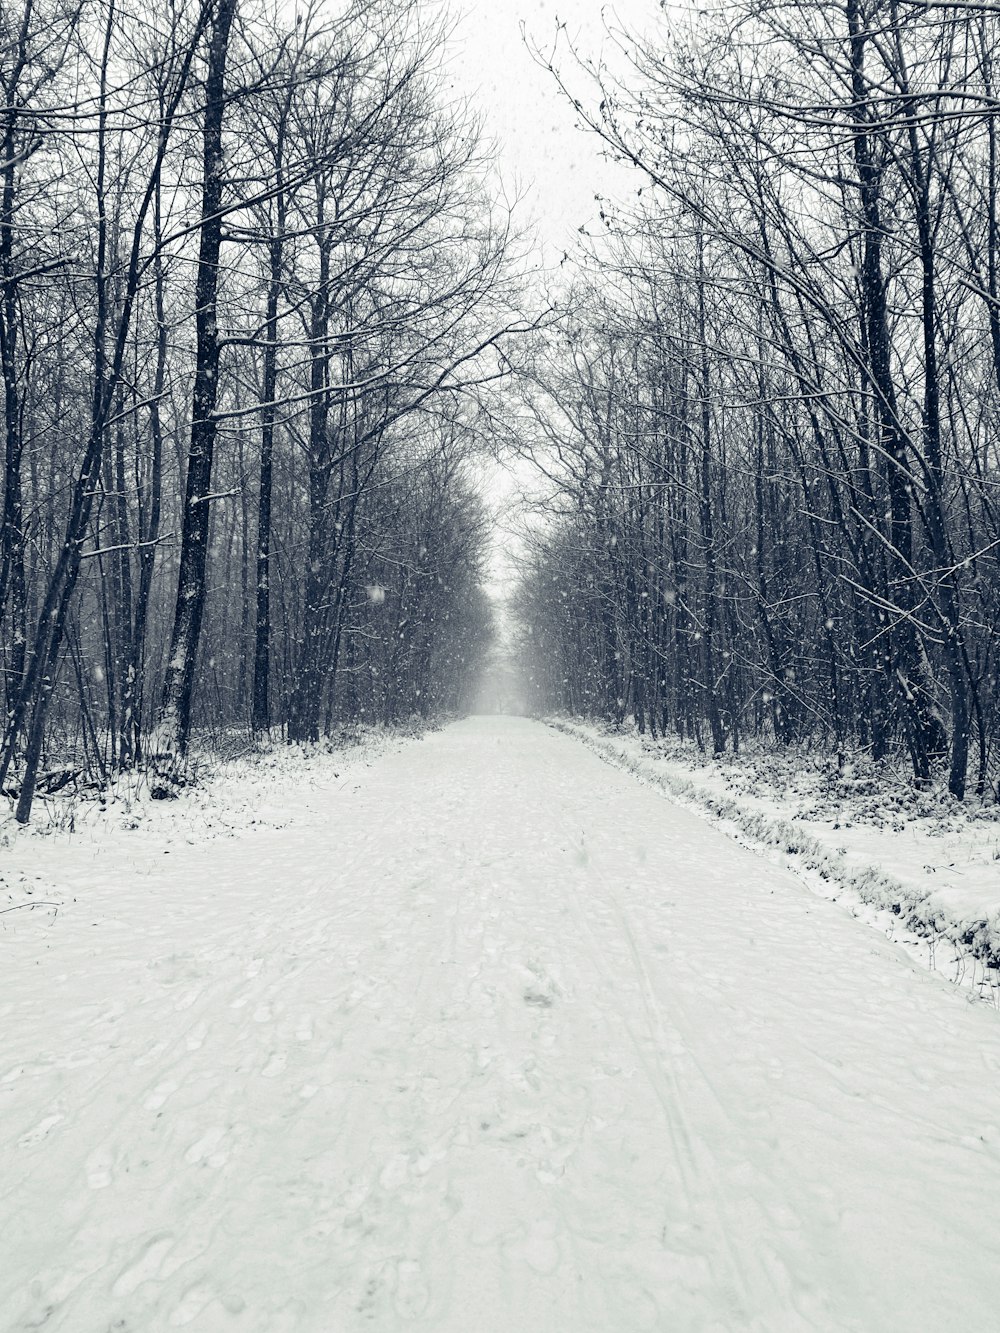 snow covered road between bare trees during daytime